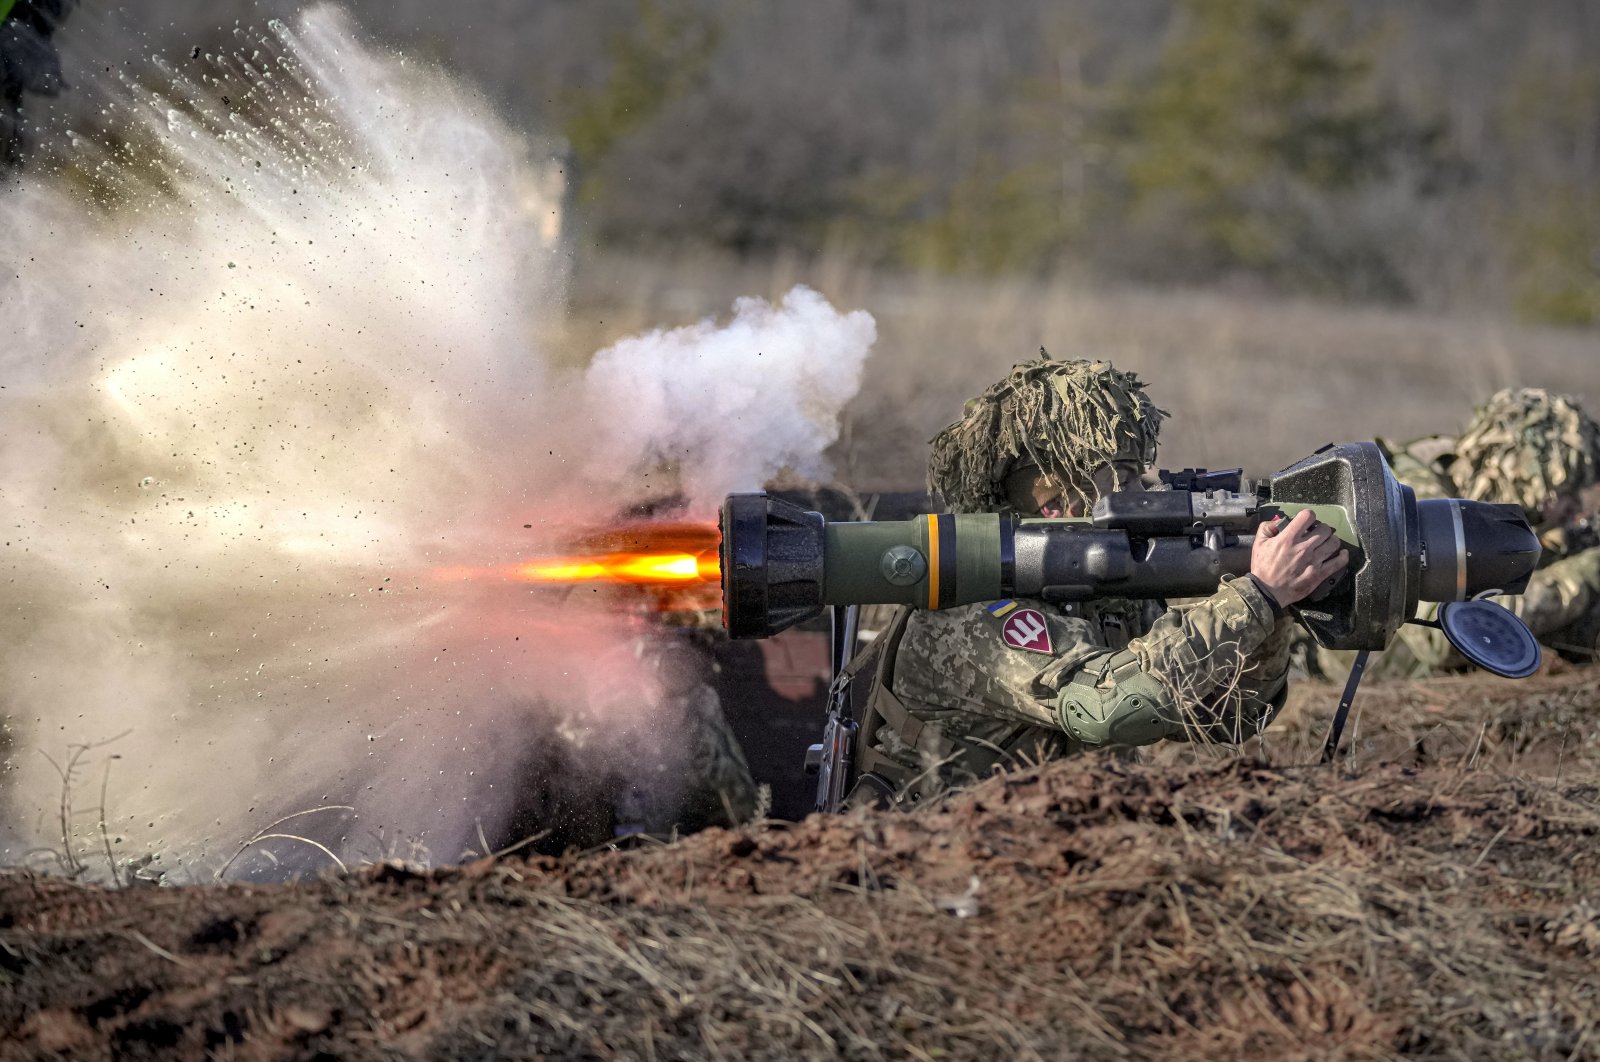 A Ukrainian serviceman fires an NLAW anti-tank weapon during an exercise in the Joint Forces Operation, in Donetsk region, Ukraine, Feb. 15, 2022. (AP Photo)